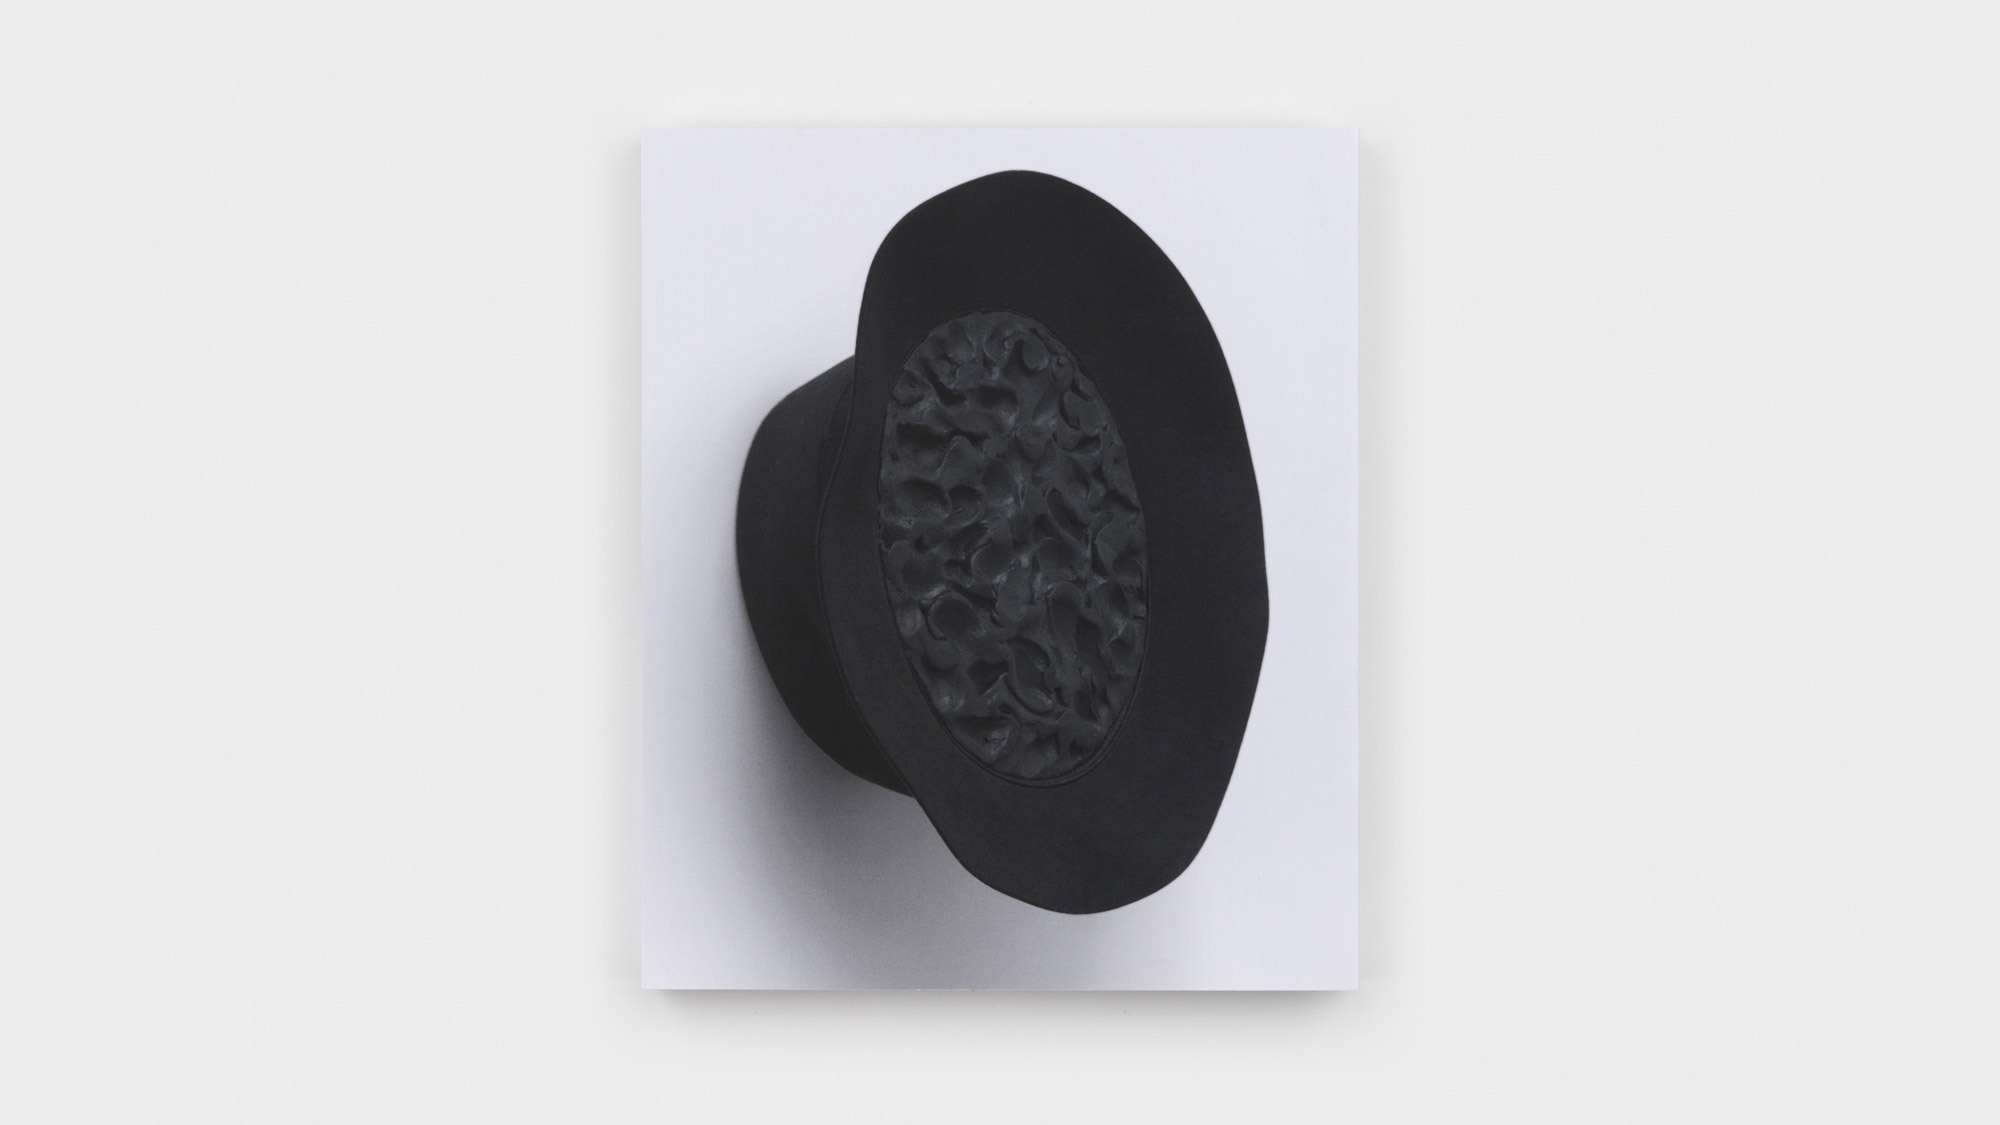 The book's back cover, featuring a black felt fedora affixed to the wall. Its cavity is filled with dark clay pocked with a finger's pinches.